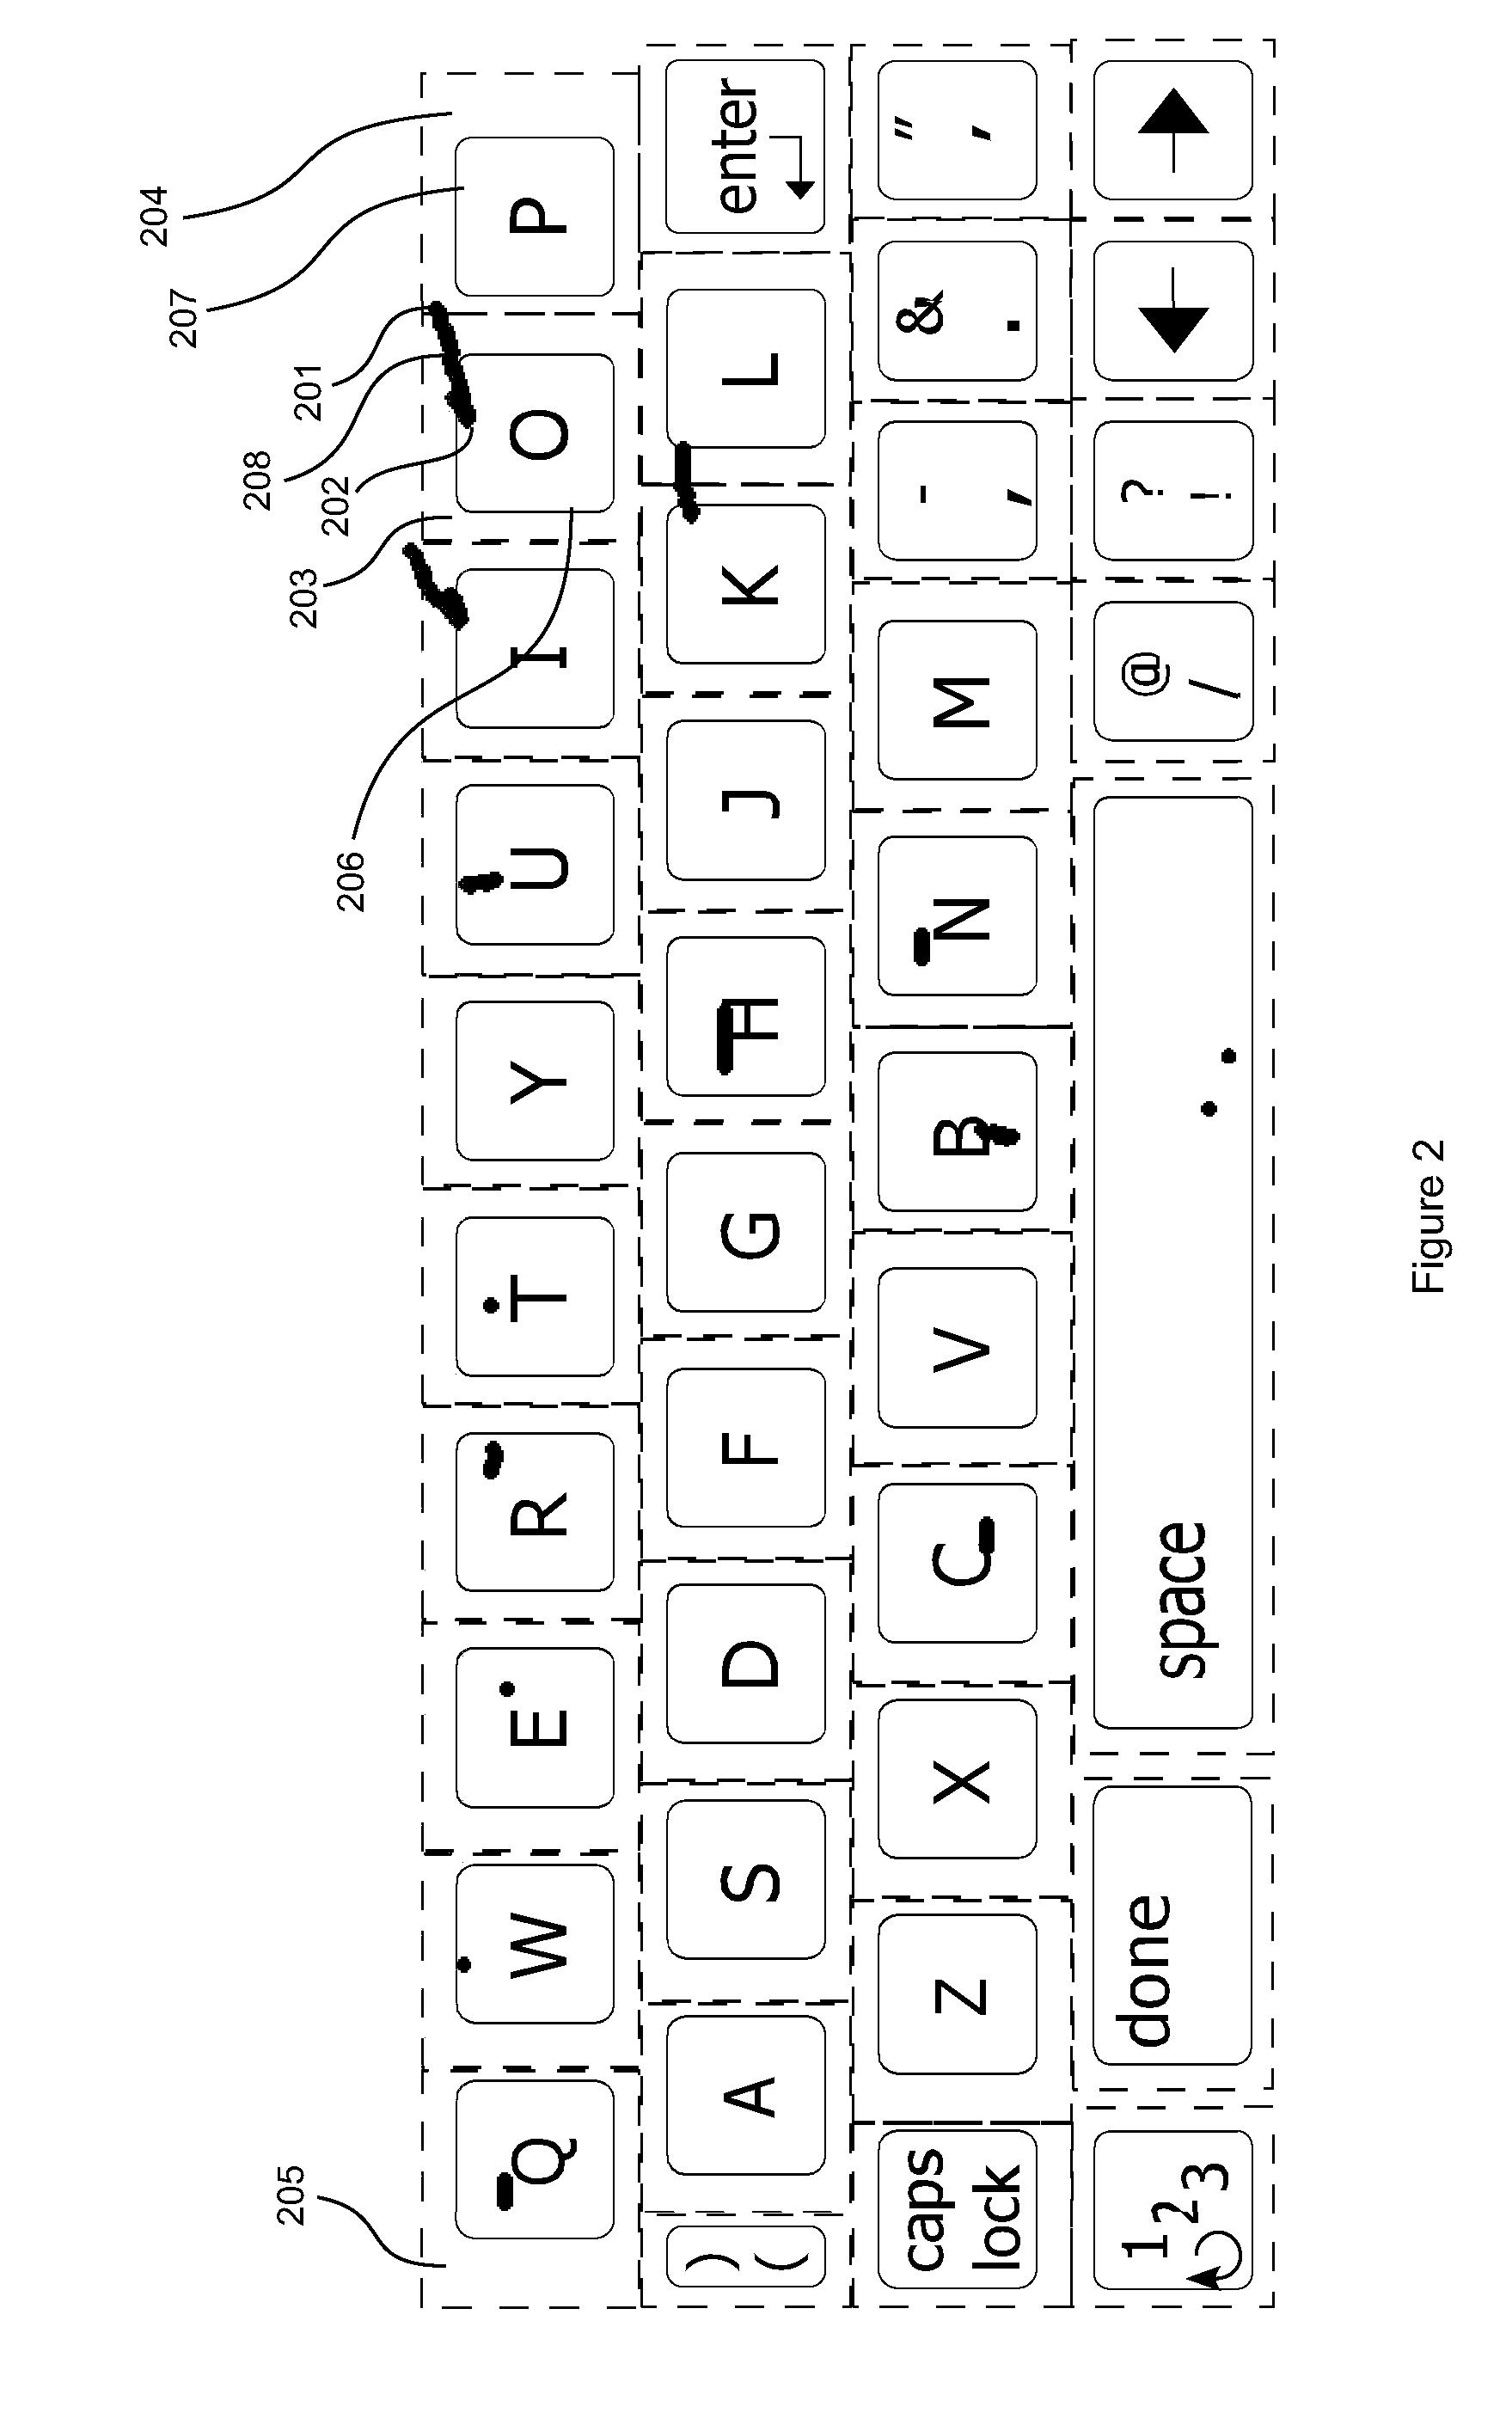 System and method for a thumb-optimized touch-screen user interface